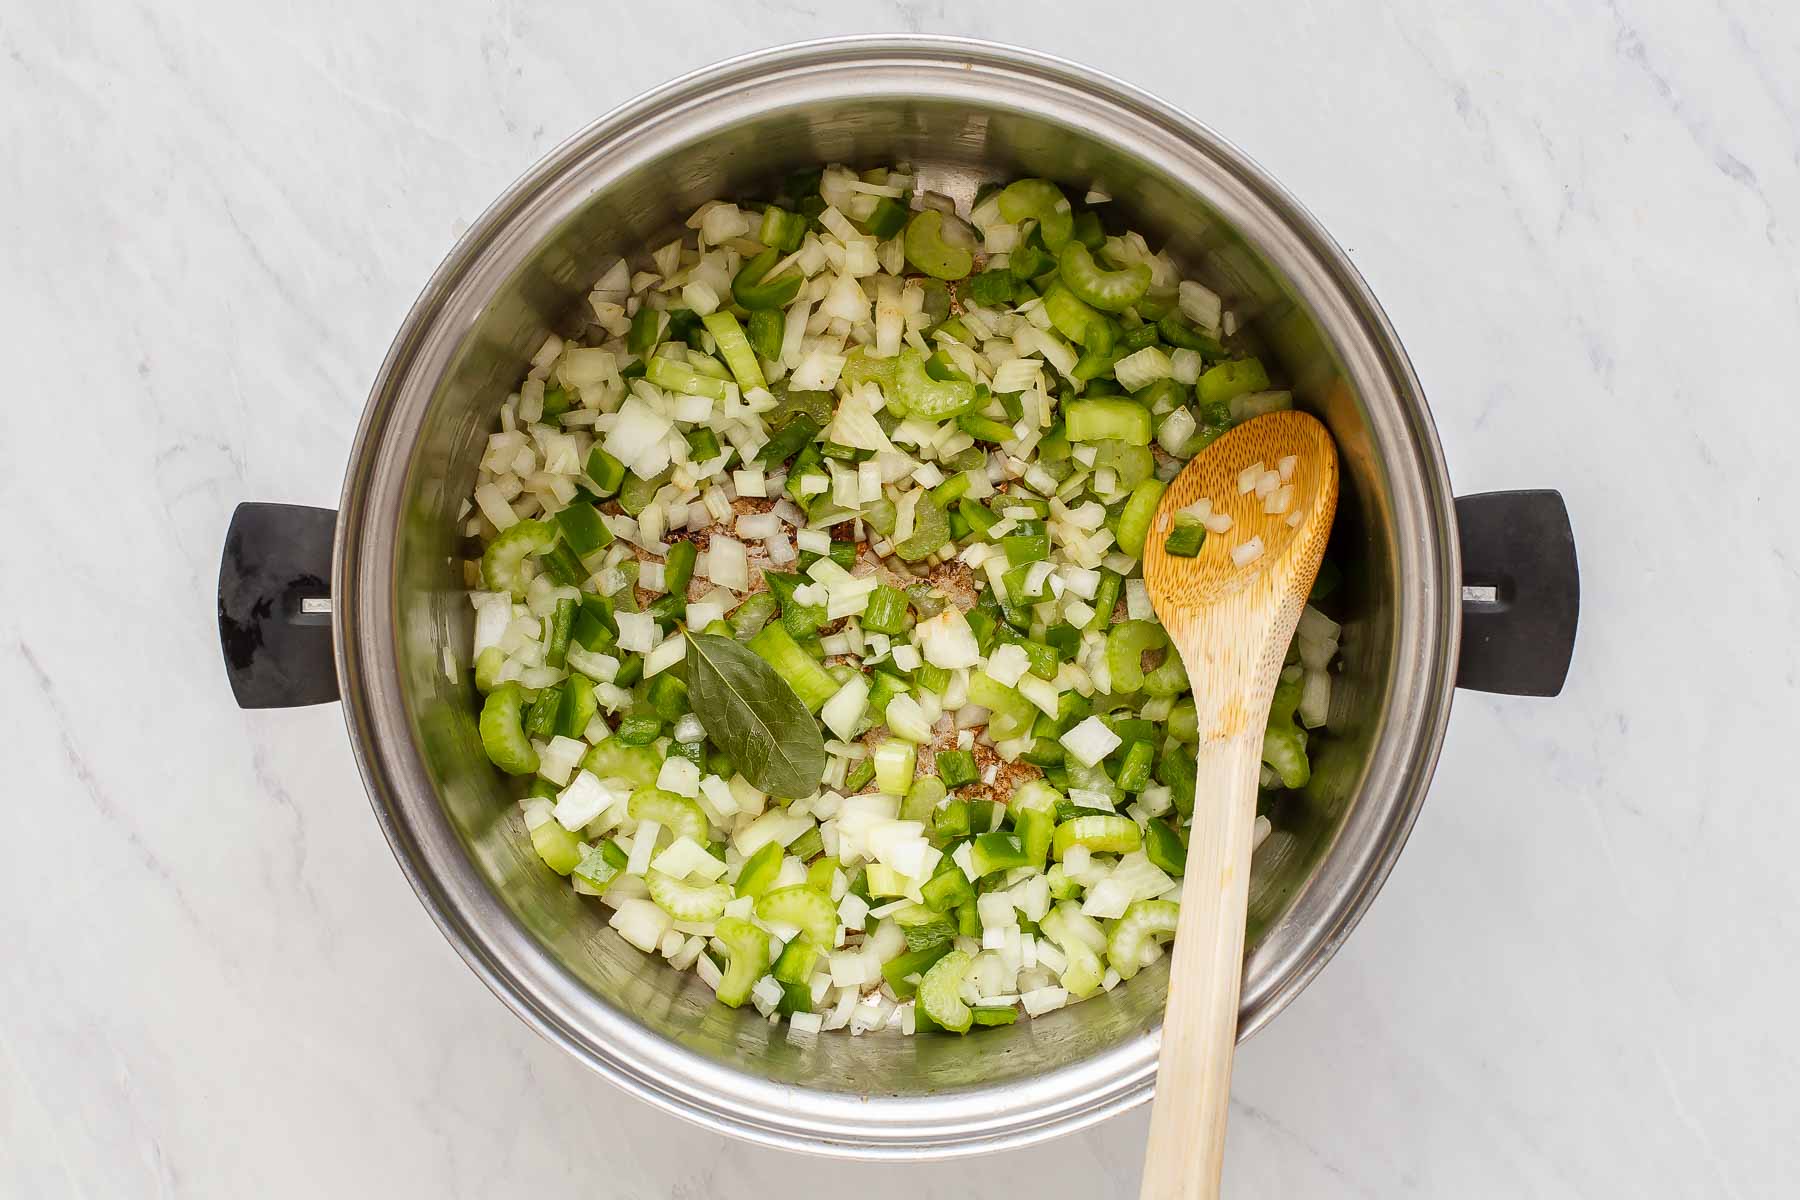 Onions, celery and green bell pepper cooking in sauce pot.